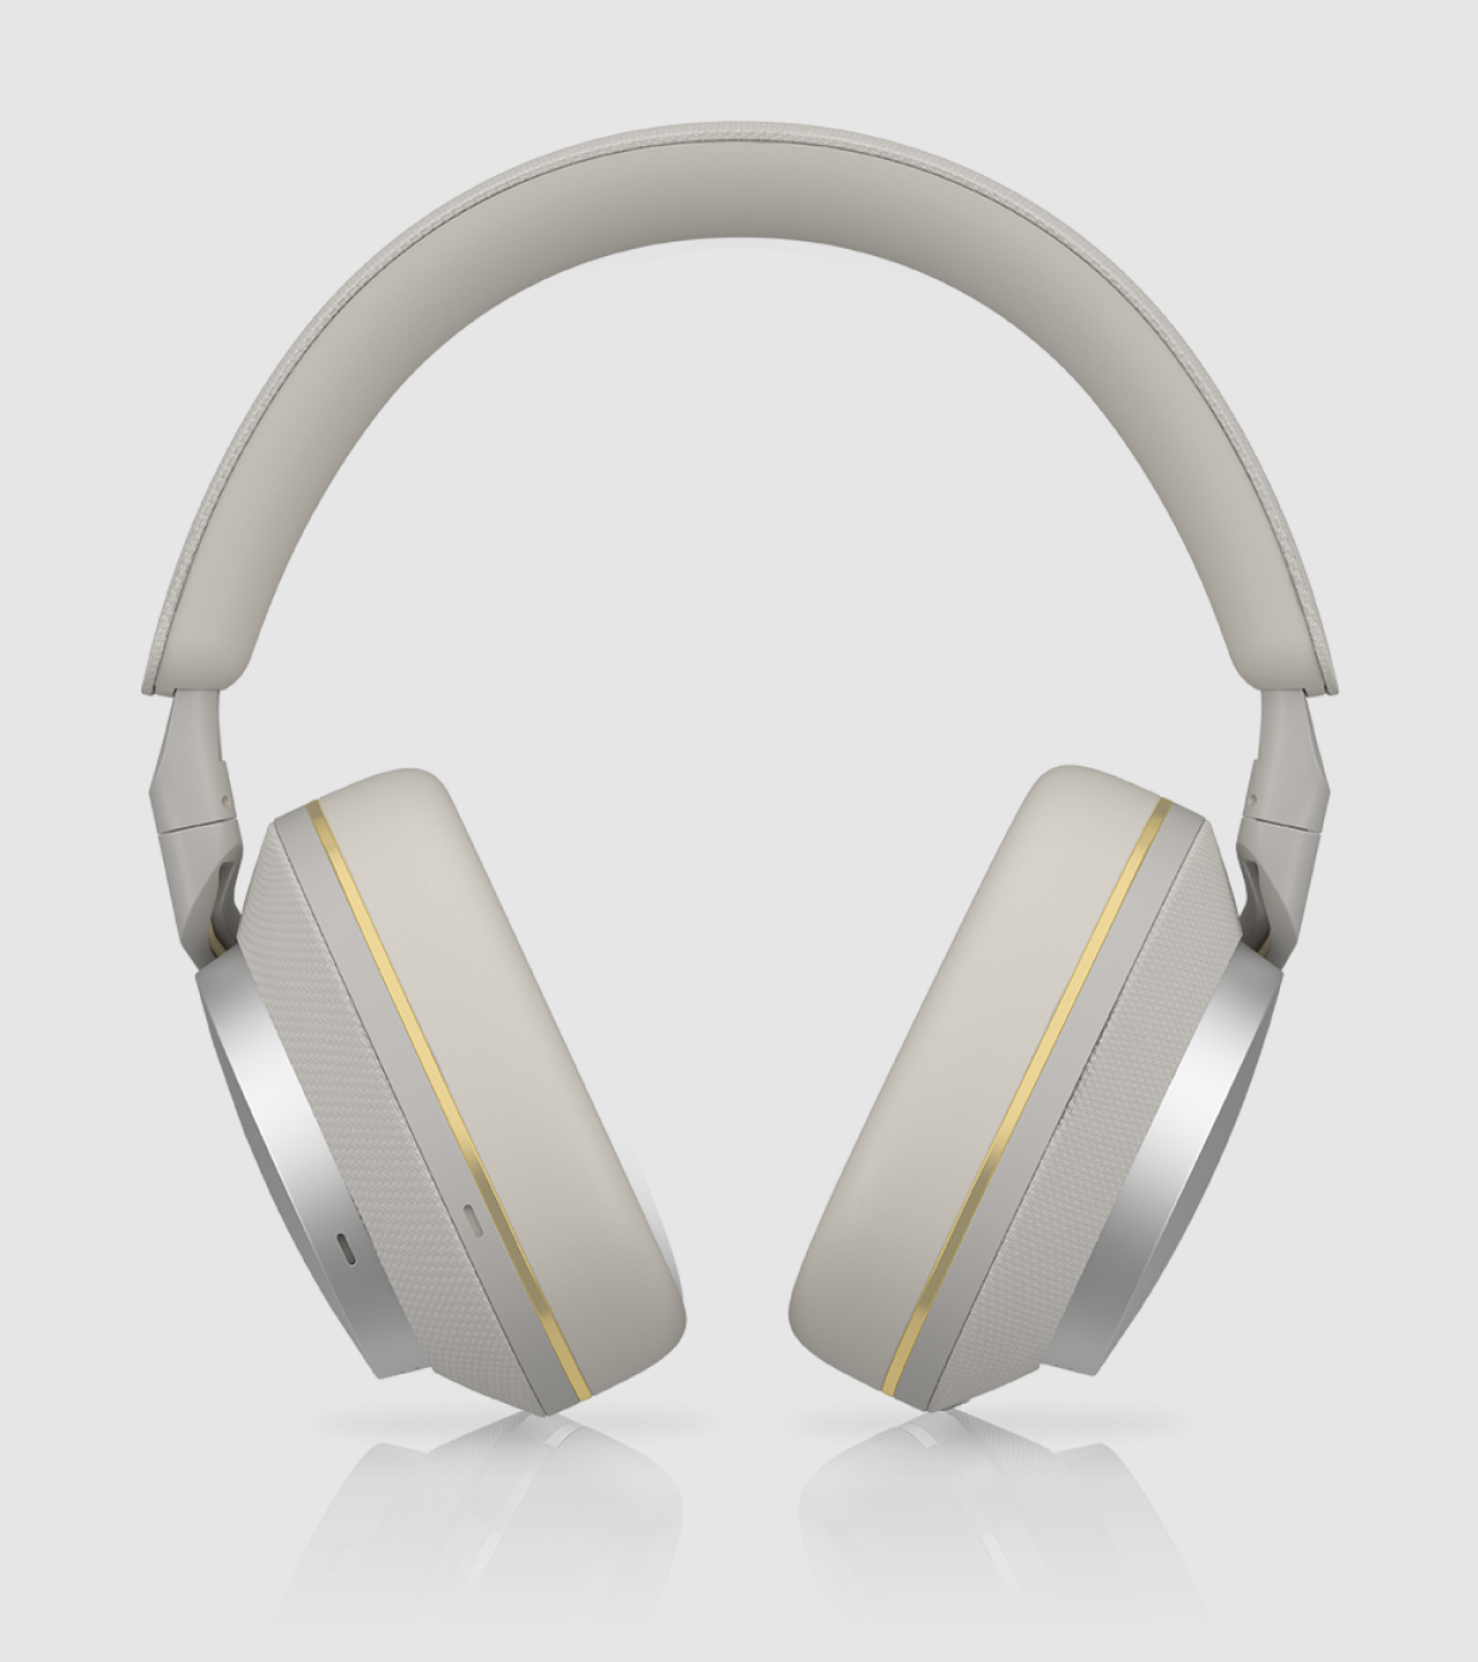 B&W Px7 S2e Noise Cancelling Headphones in Cloud Gray. Image of front